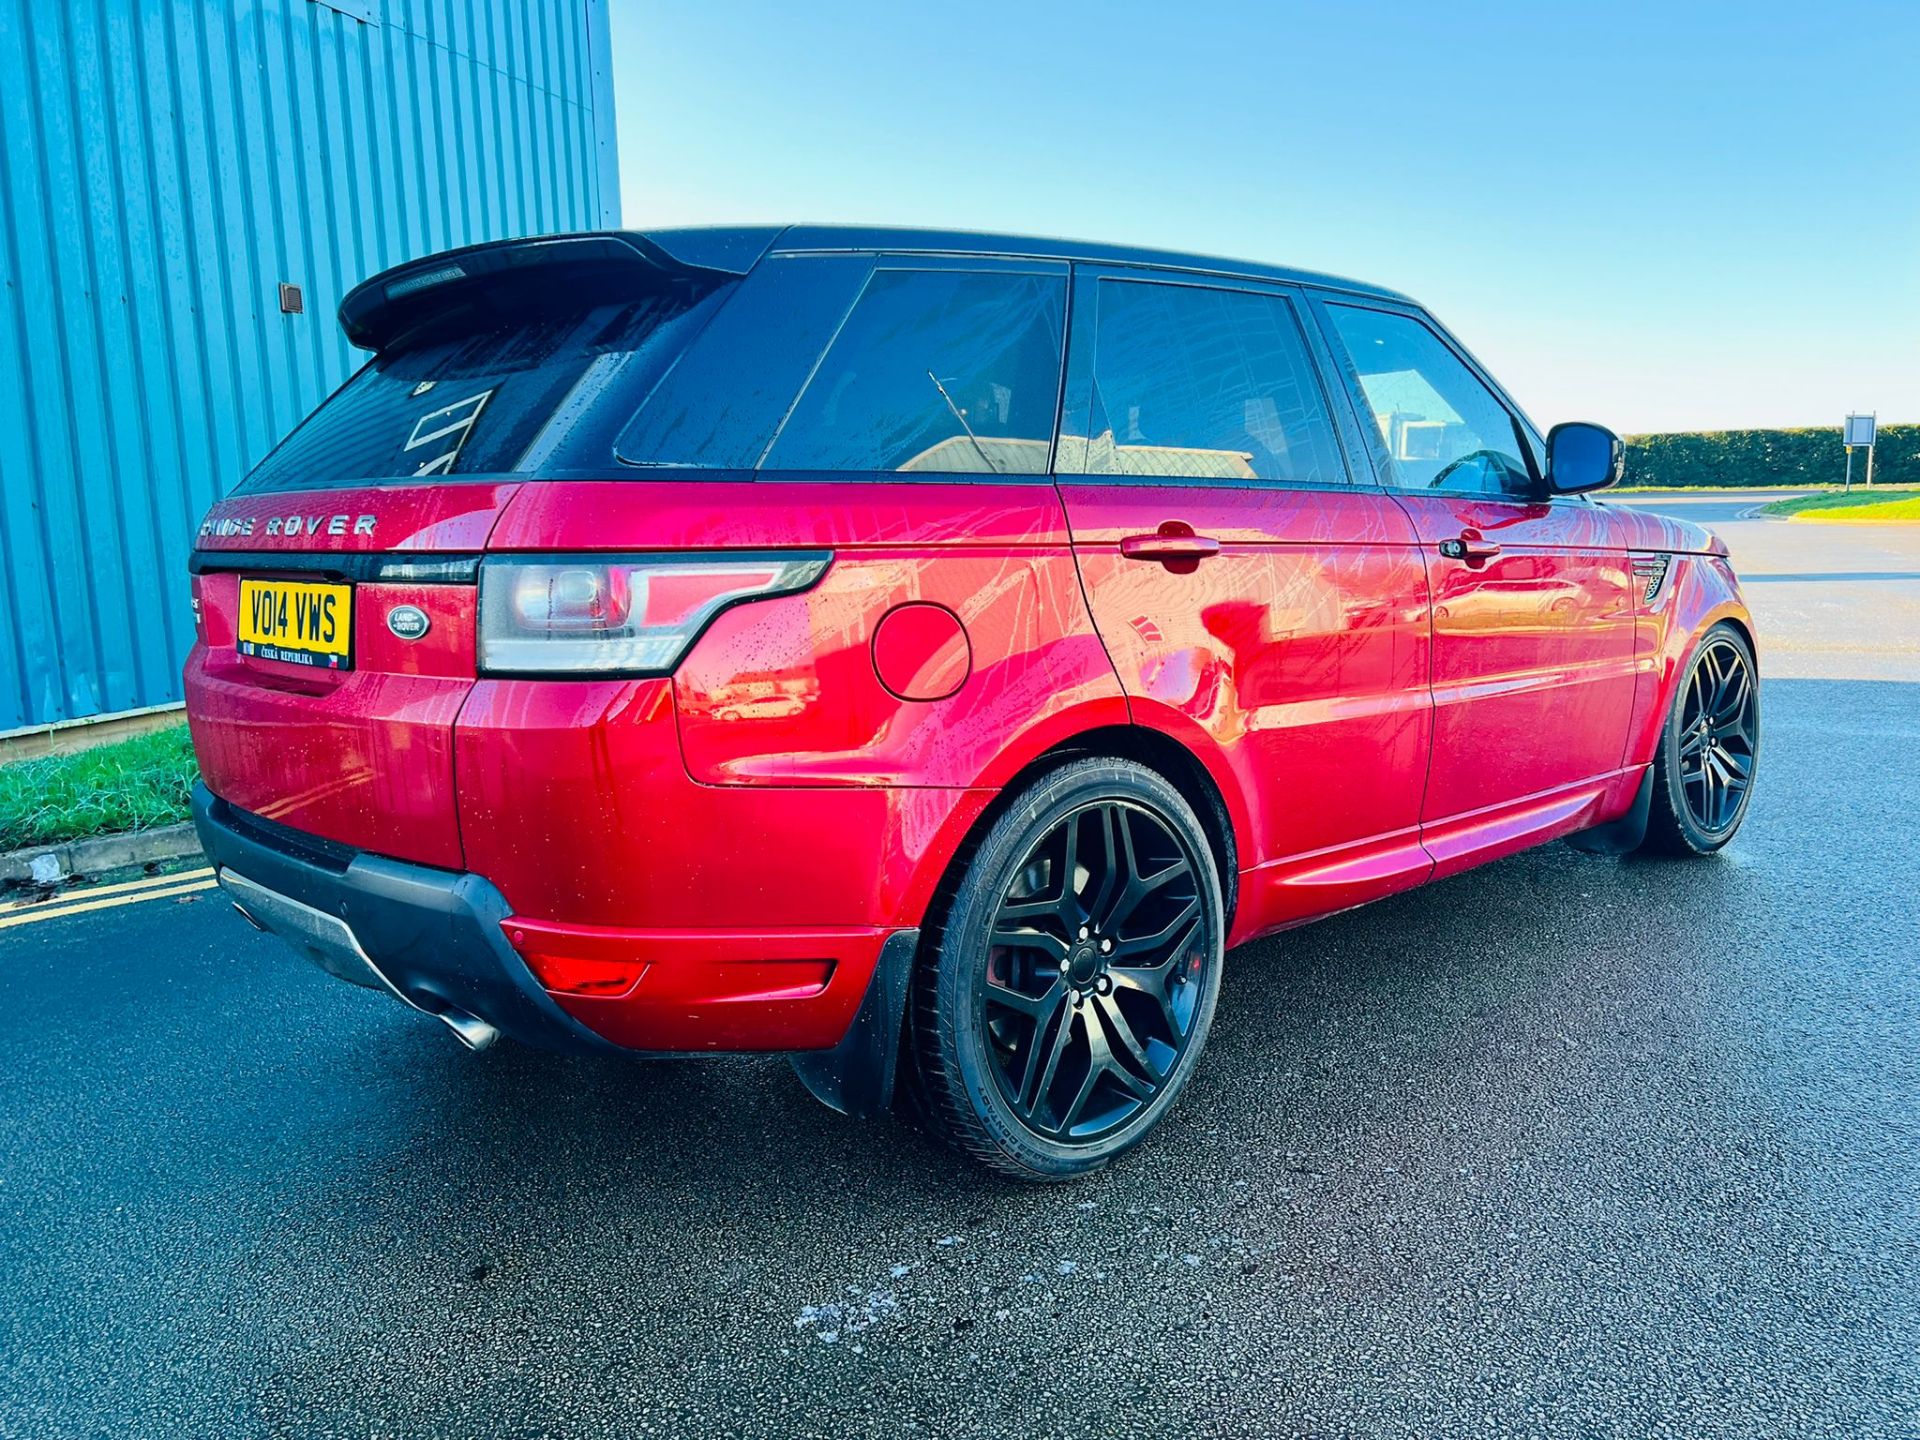 Range Rover Sport 3.0 SDV6 Autobiography Dynamic Auto Command Shift -Start/Stop- 2014 14Reg-Pan roof - Image 4 of 44